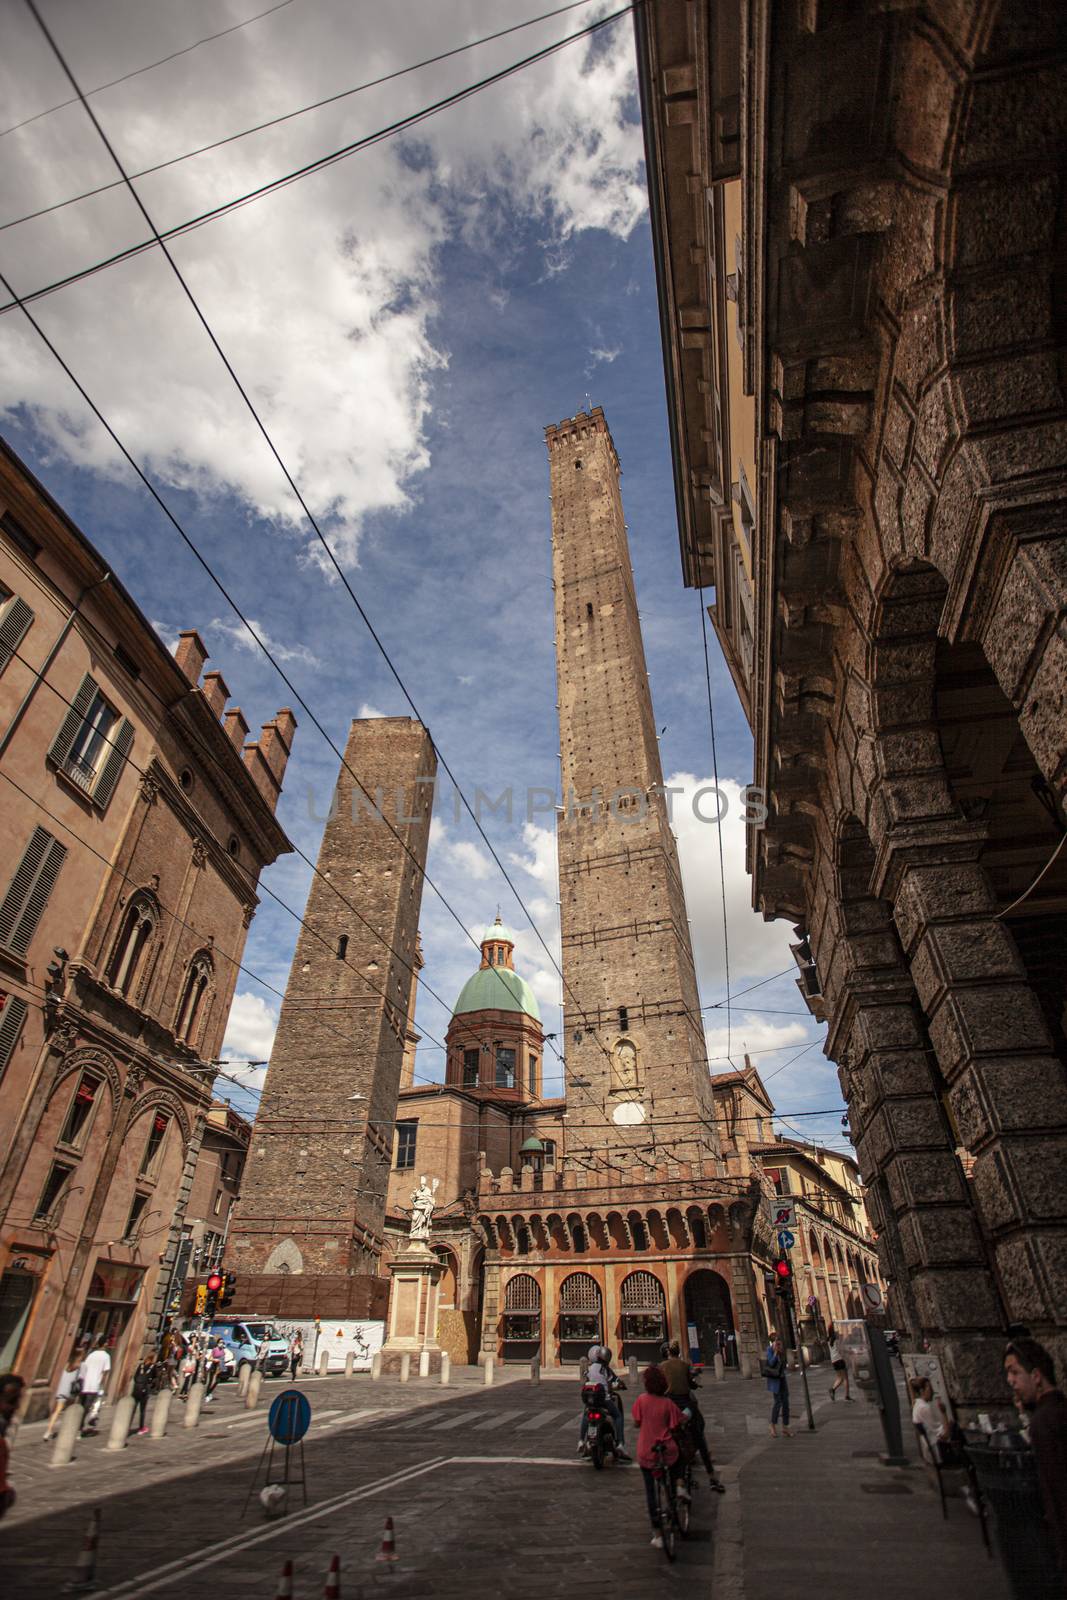 Asinelli tower in Bologna, Italy by pippocarlot